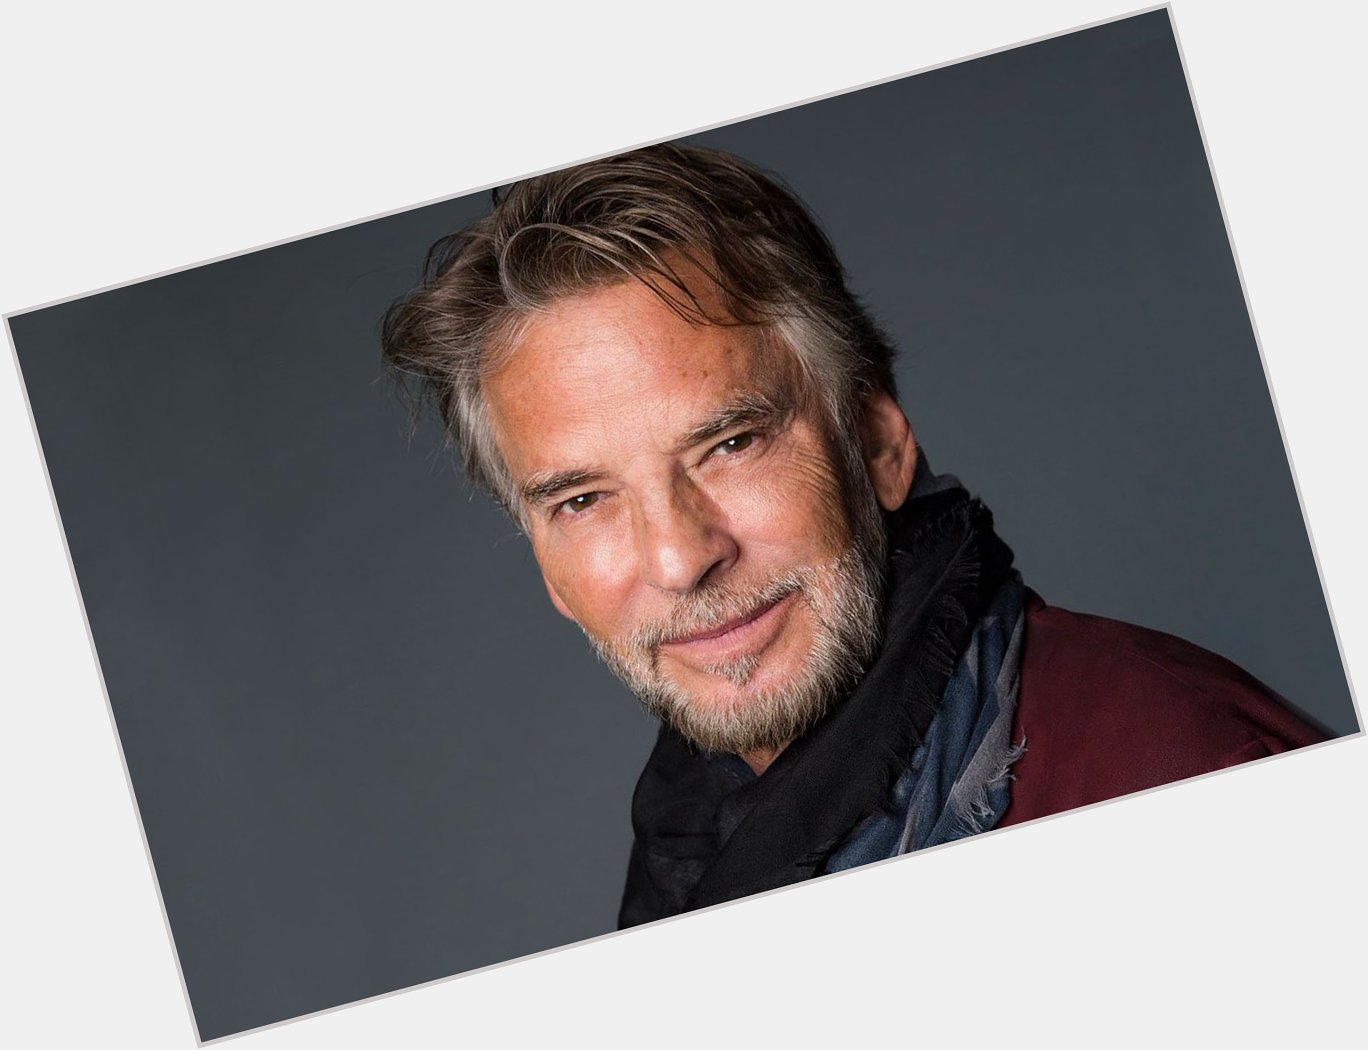 A Big BOSS Happy Birthday to Kenny Loggins from all of us at 